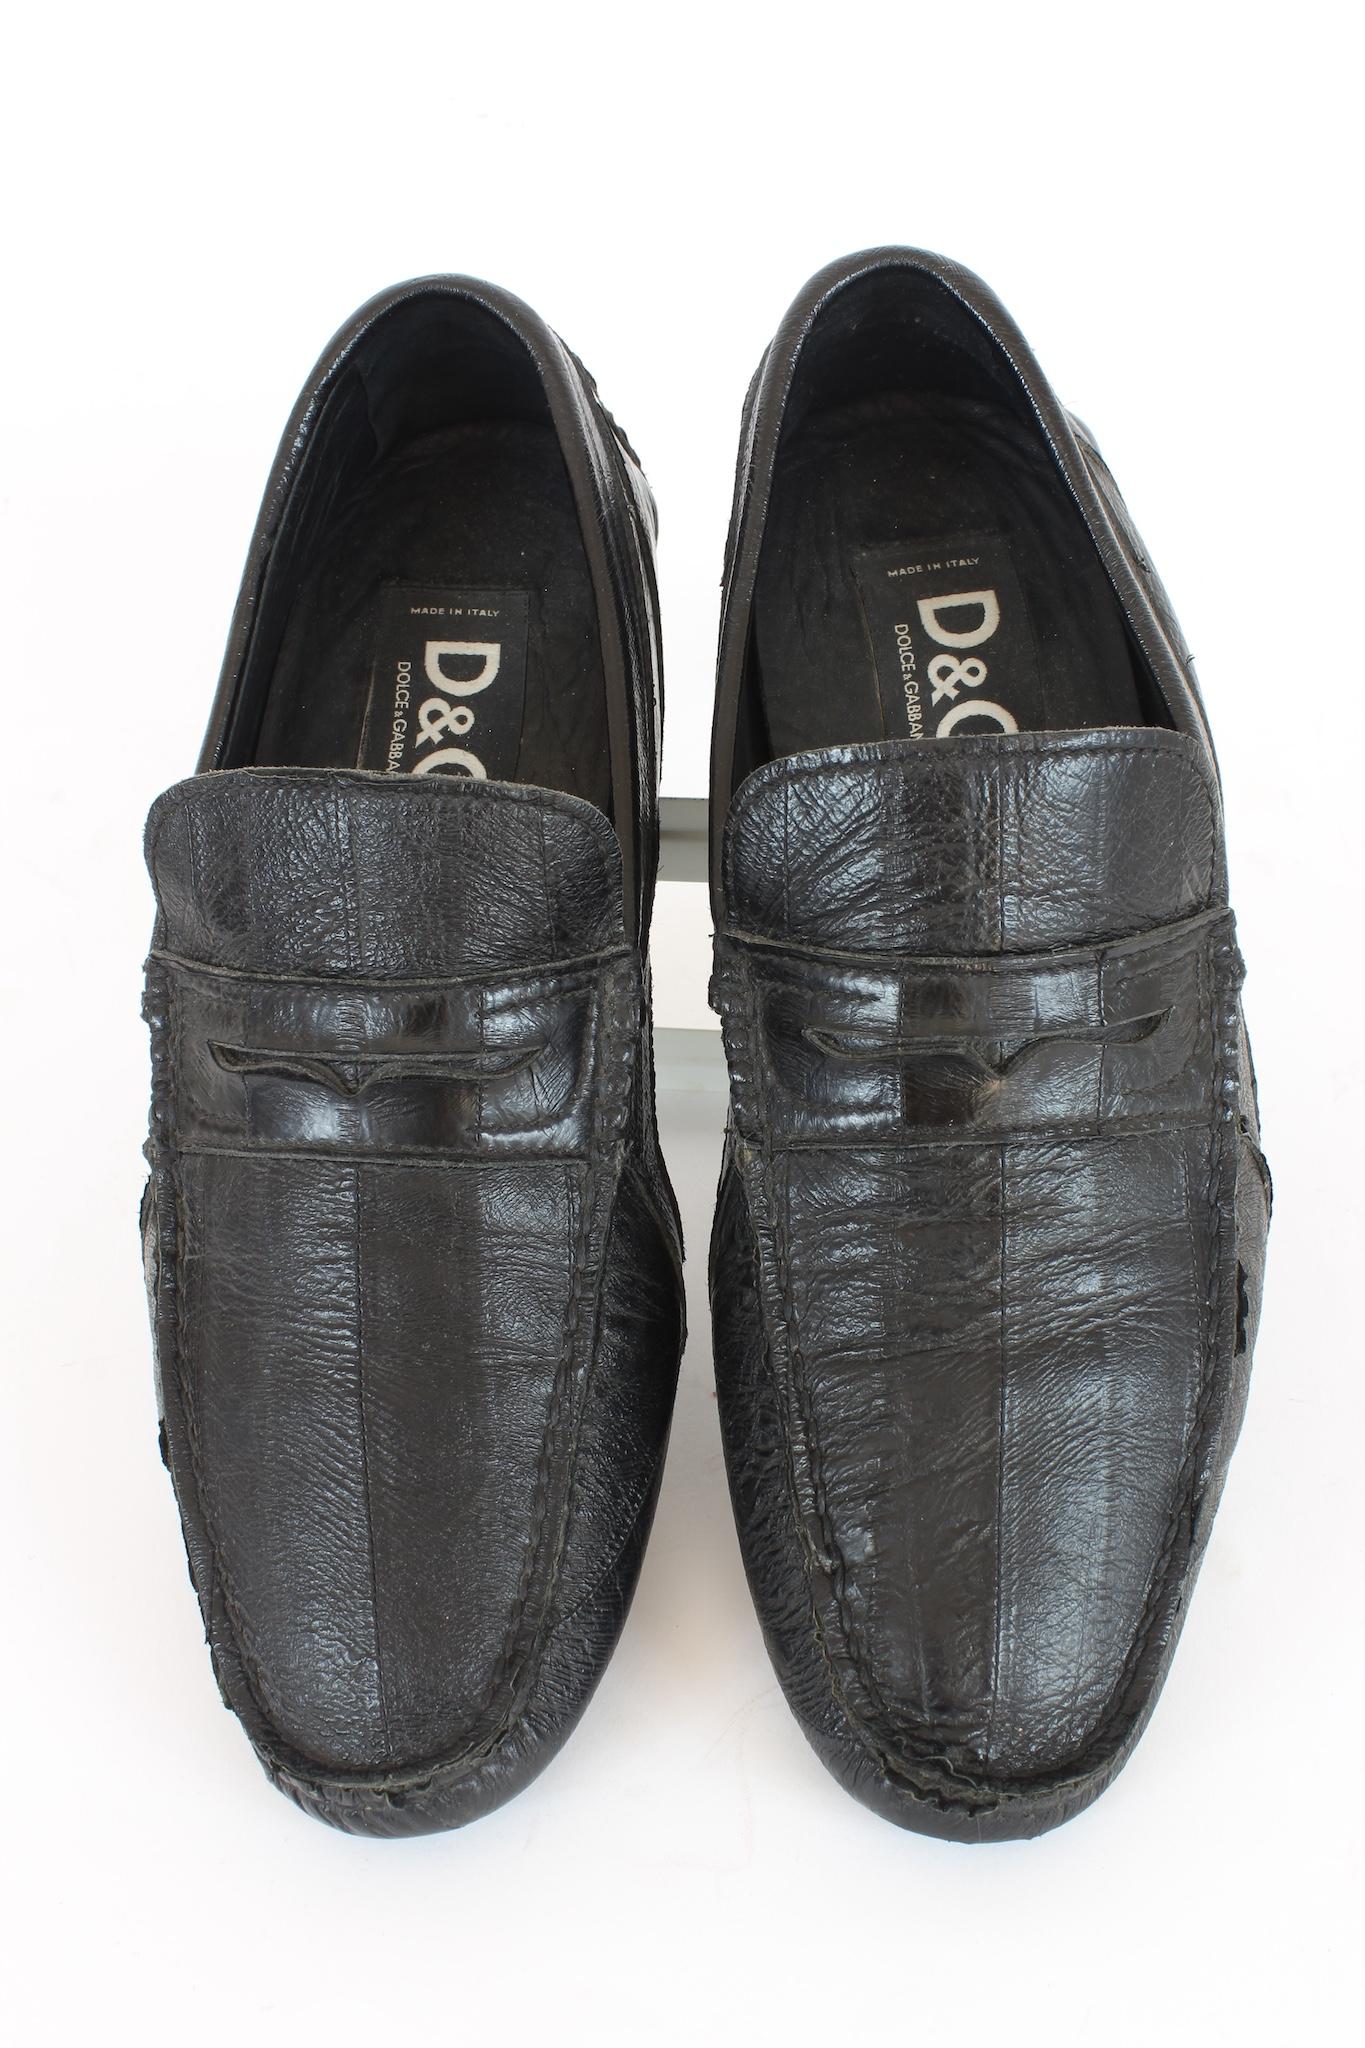 Dolce & Gabbana vintage 2000s mocassins. Black color, rounded toe, 100% leather. Embossed logo on the heel. Made in italy.

Code: DUO374 E 8006

Size: 39 It Us 9 Uk 6

Sole length: 27cm

